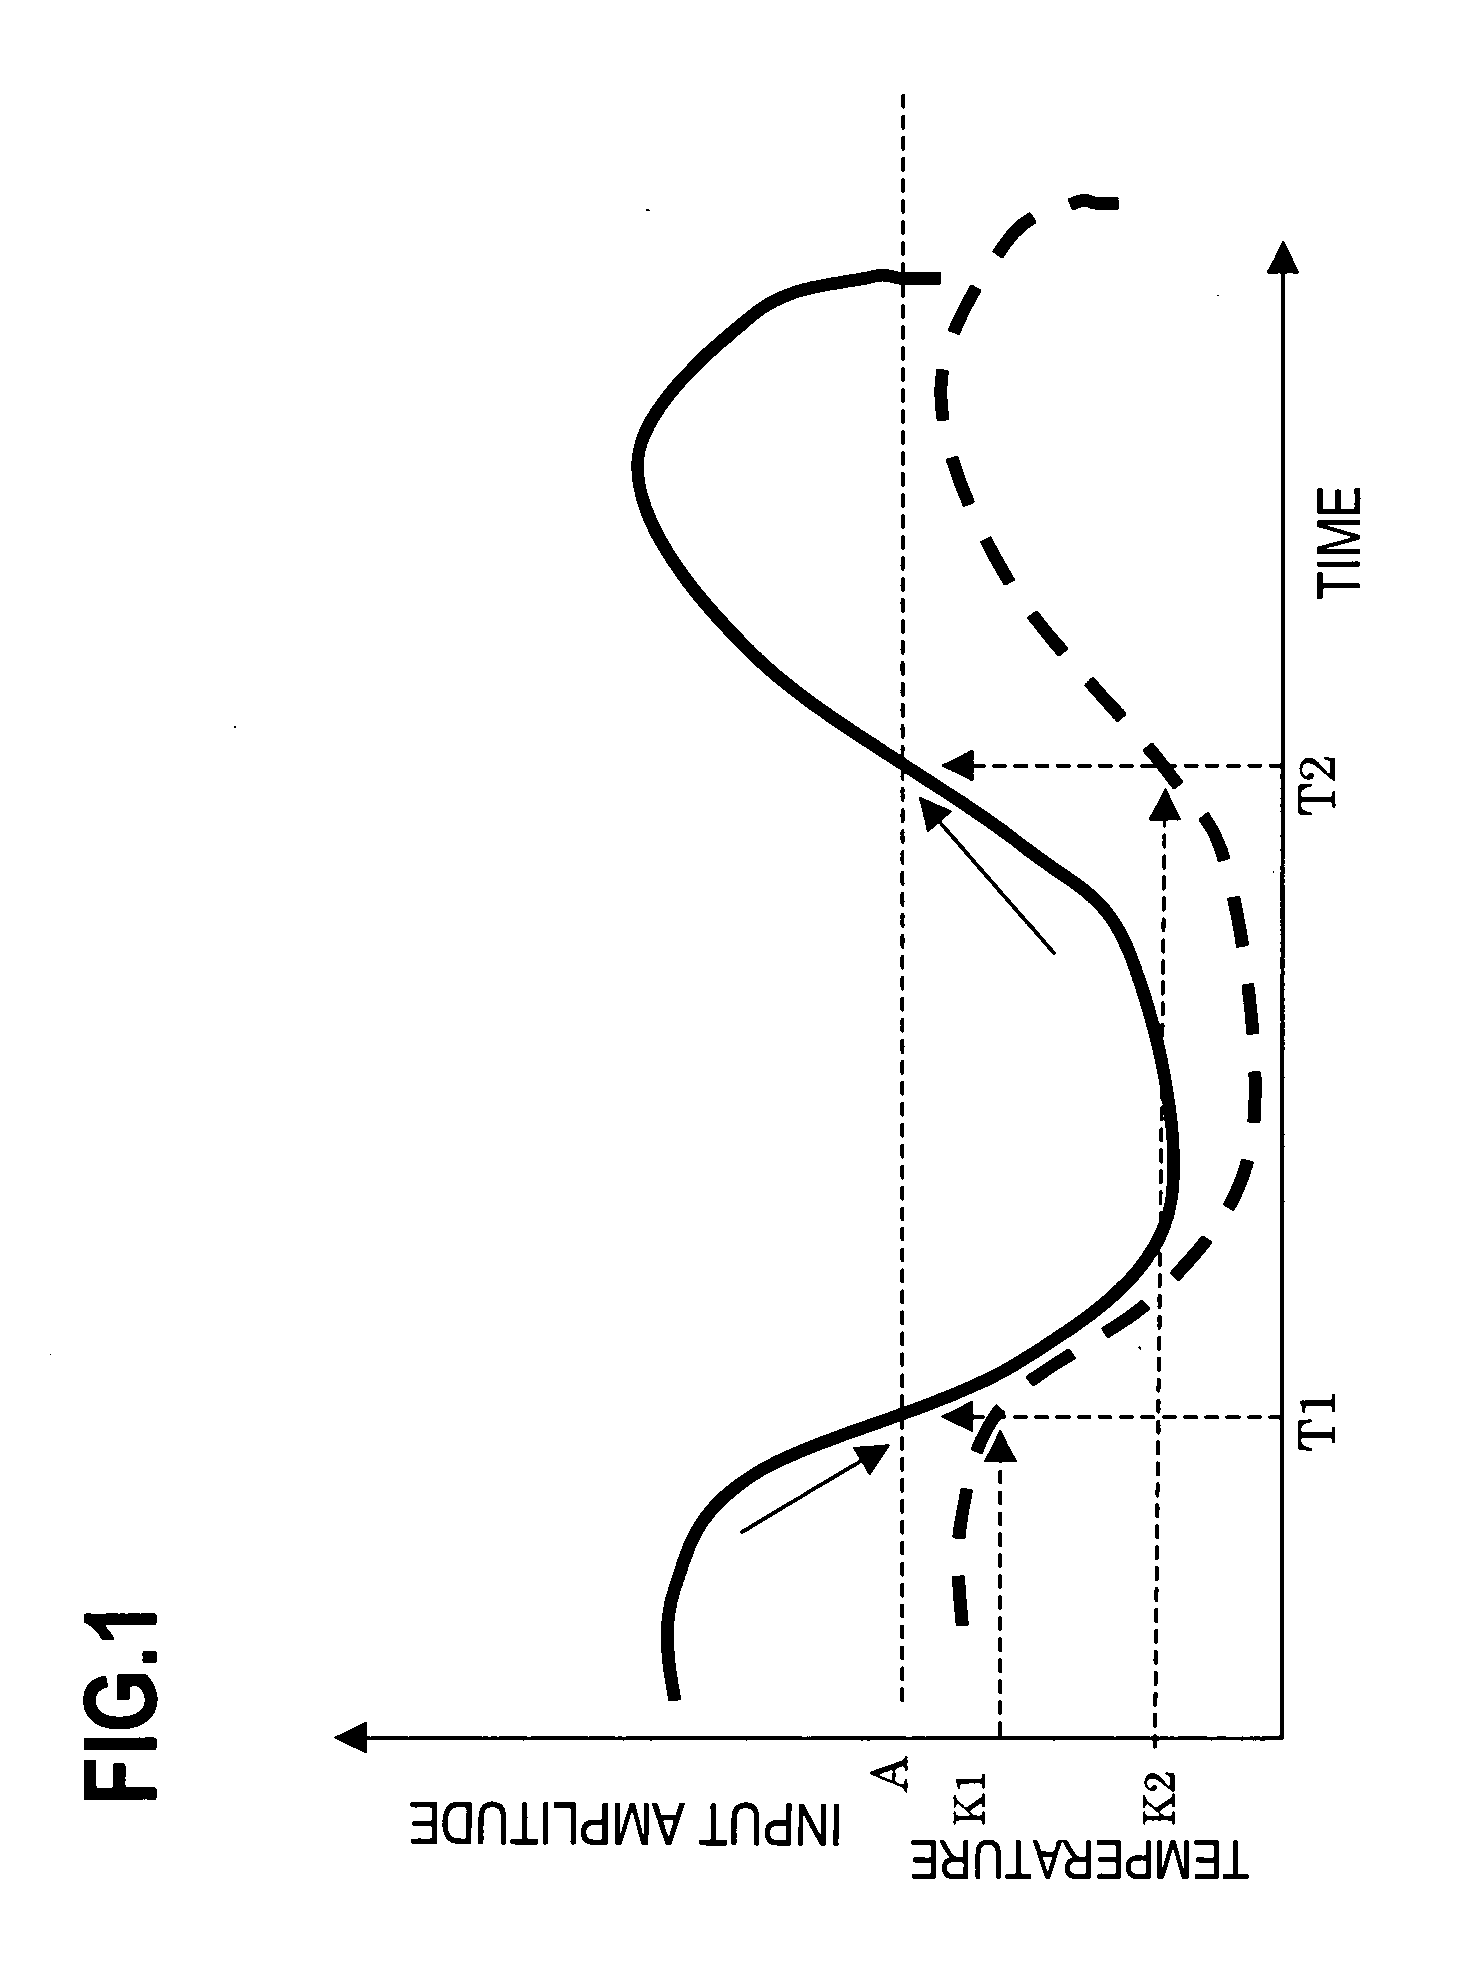 Power amplifier with distortion compensation circuit